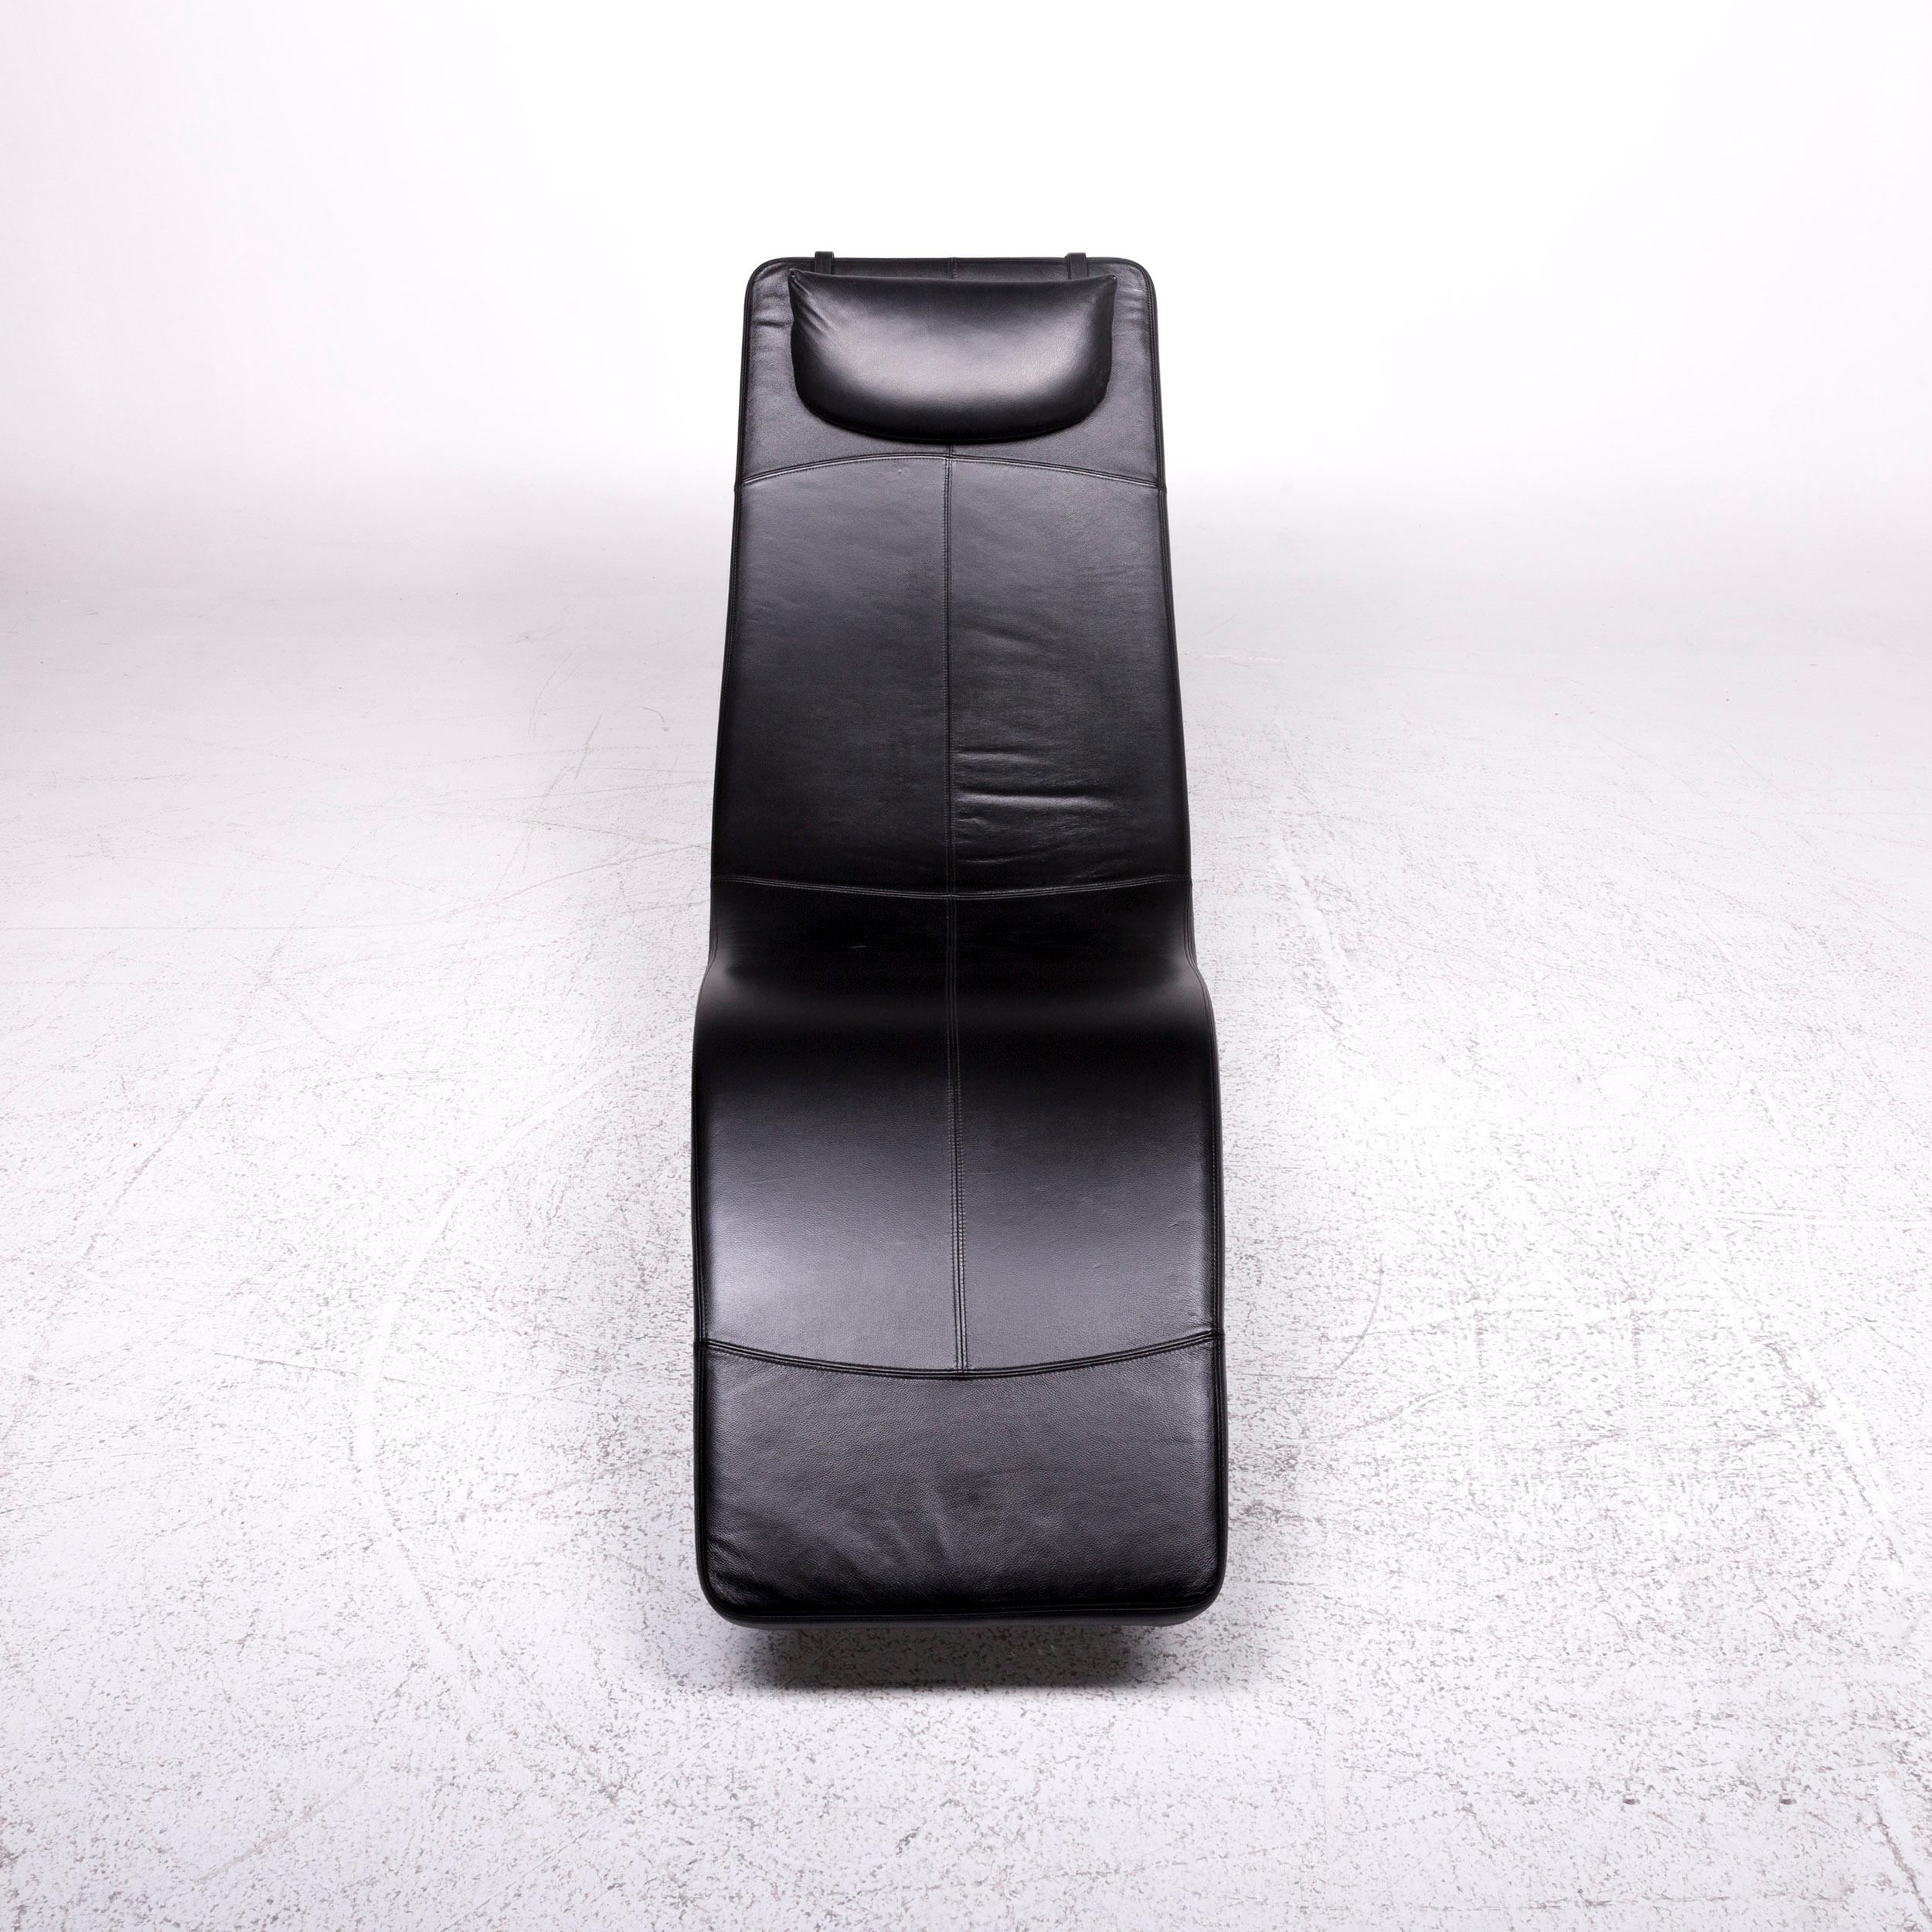 We bring to you a Who's perfect leather lounger black relax.

 Product measurements in centimeters:
 
Depth: 158
Width: 59
Height: 99
Seat-height: 41
Rest-height:
Seat-depth: 99
Seat-width: 59
Back-height: 60.

 